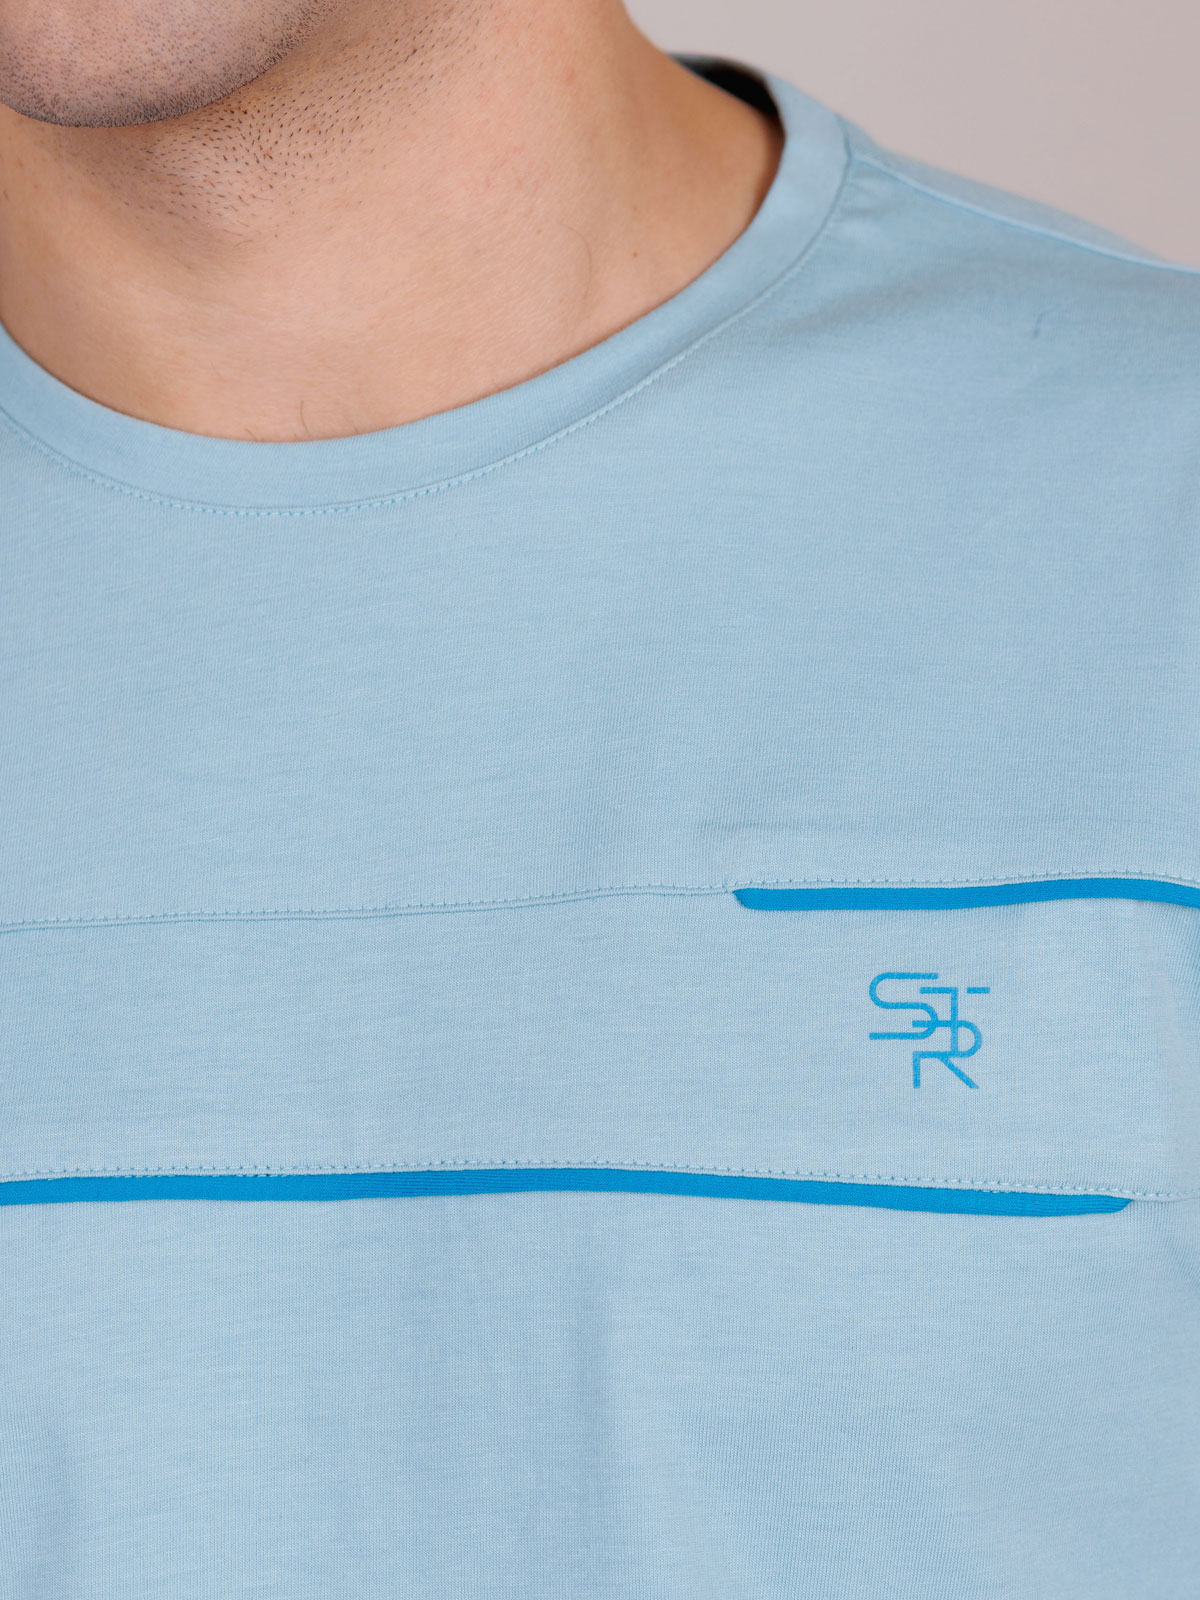 Tshirt in light blue with logo - 96454 € 21.93 img3